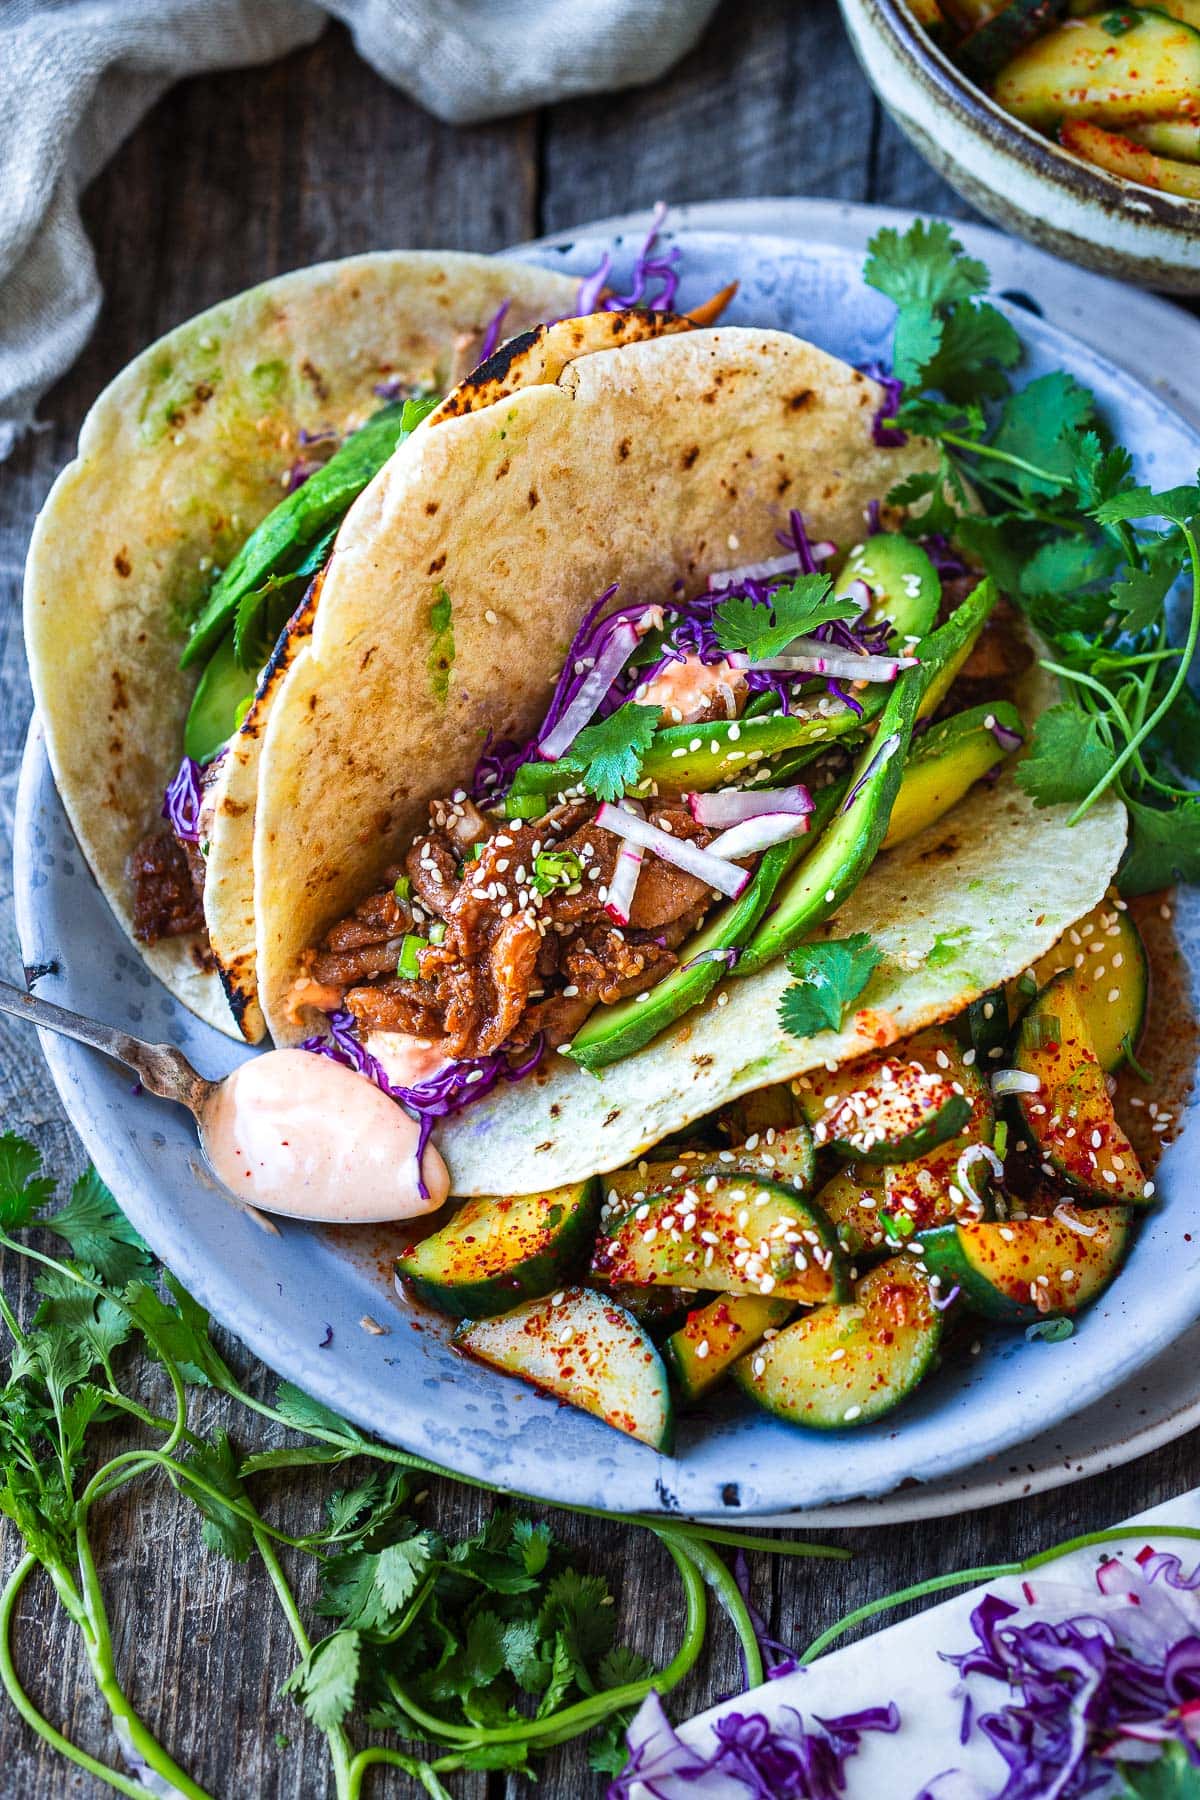 Take taco night to the next level!  Korean Tacos with chicken bulgogi are so incredibly flavorful-succulent, marinated chicken is sauteed until tender and topped with fresh avocado, cabbage, and a creamy gochujang taco sauce. 